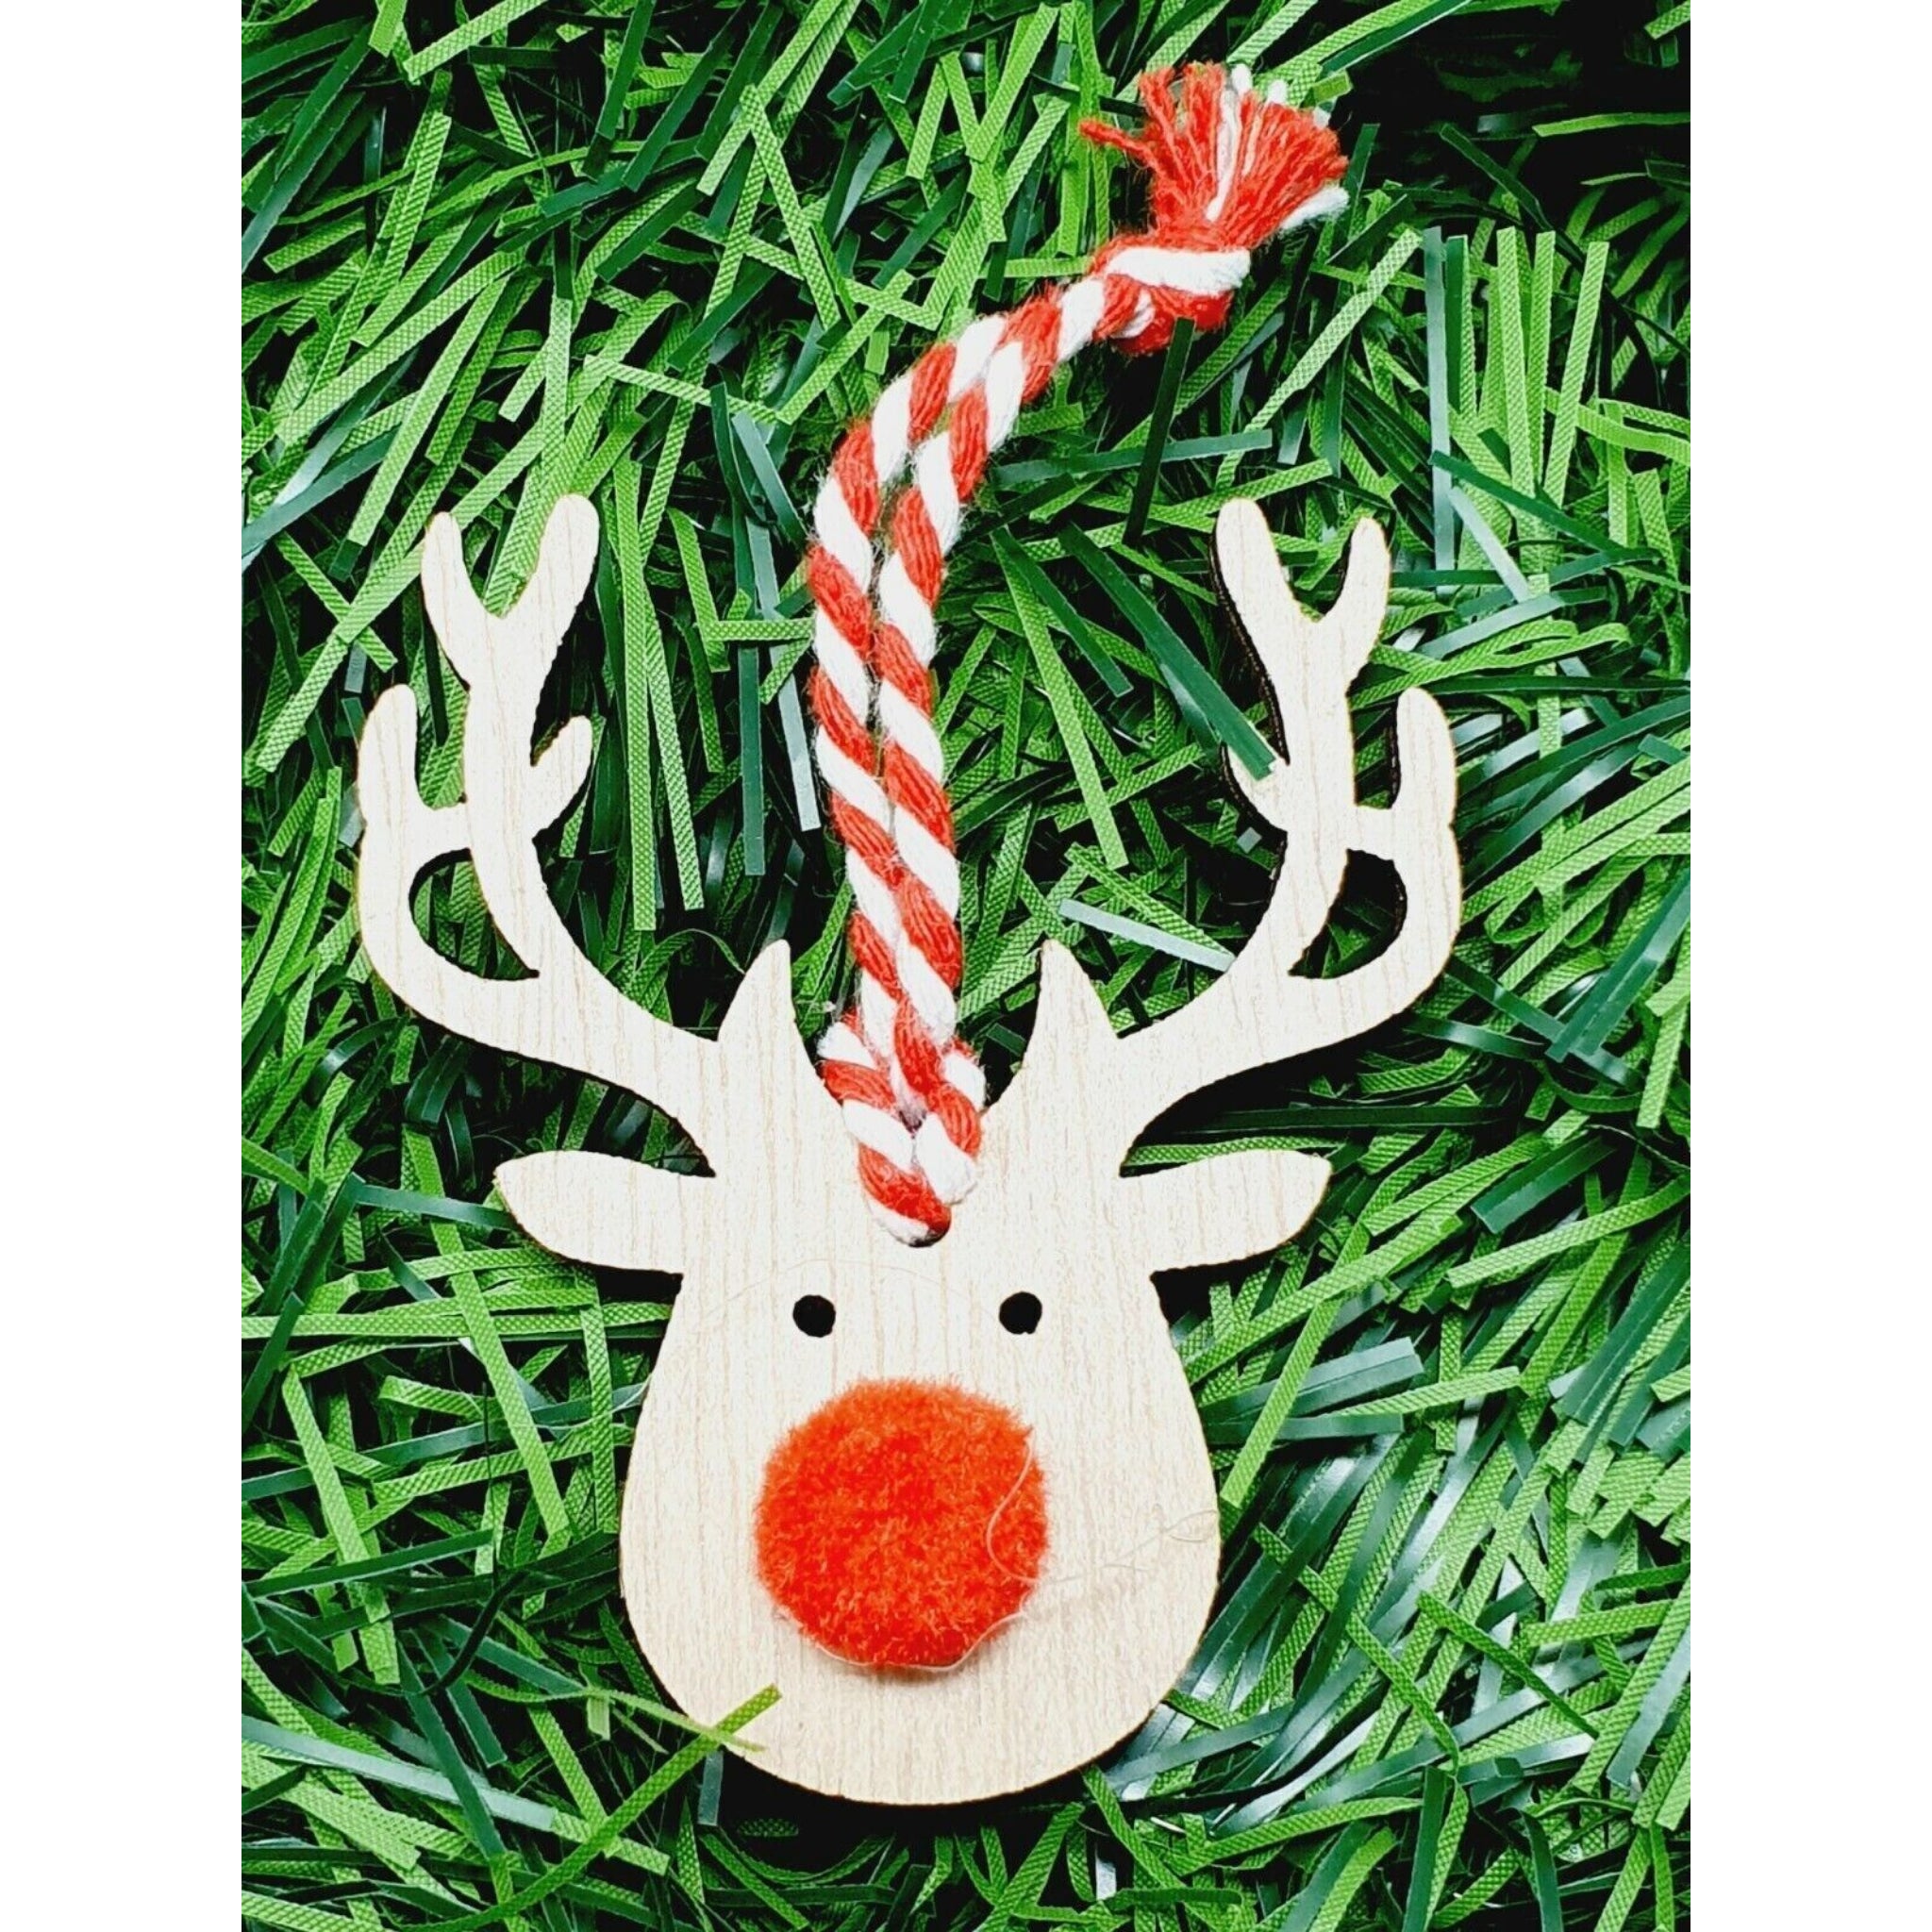 Beclen Harp 9x Christmas/Xmas Wooden Rustic Red Nose Hanging Reindeer Tree Decoration-Perfect Christmas/Xmas Decor